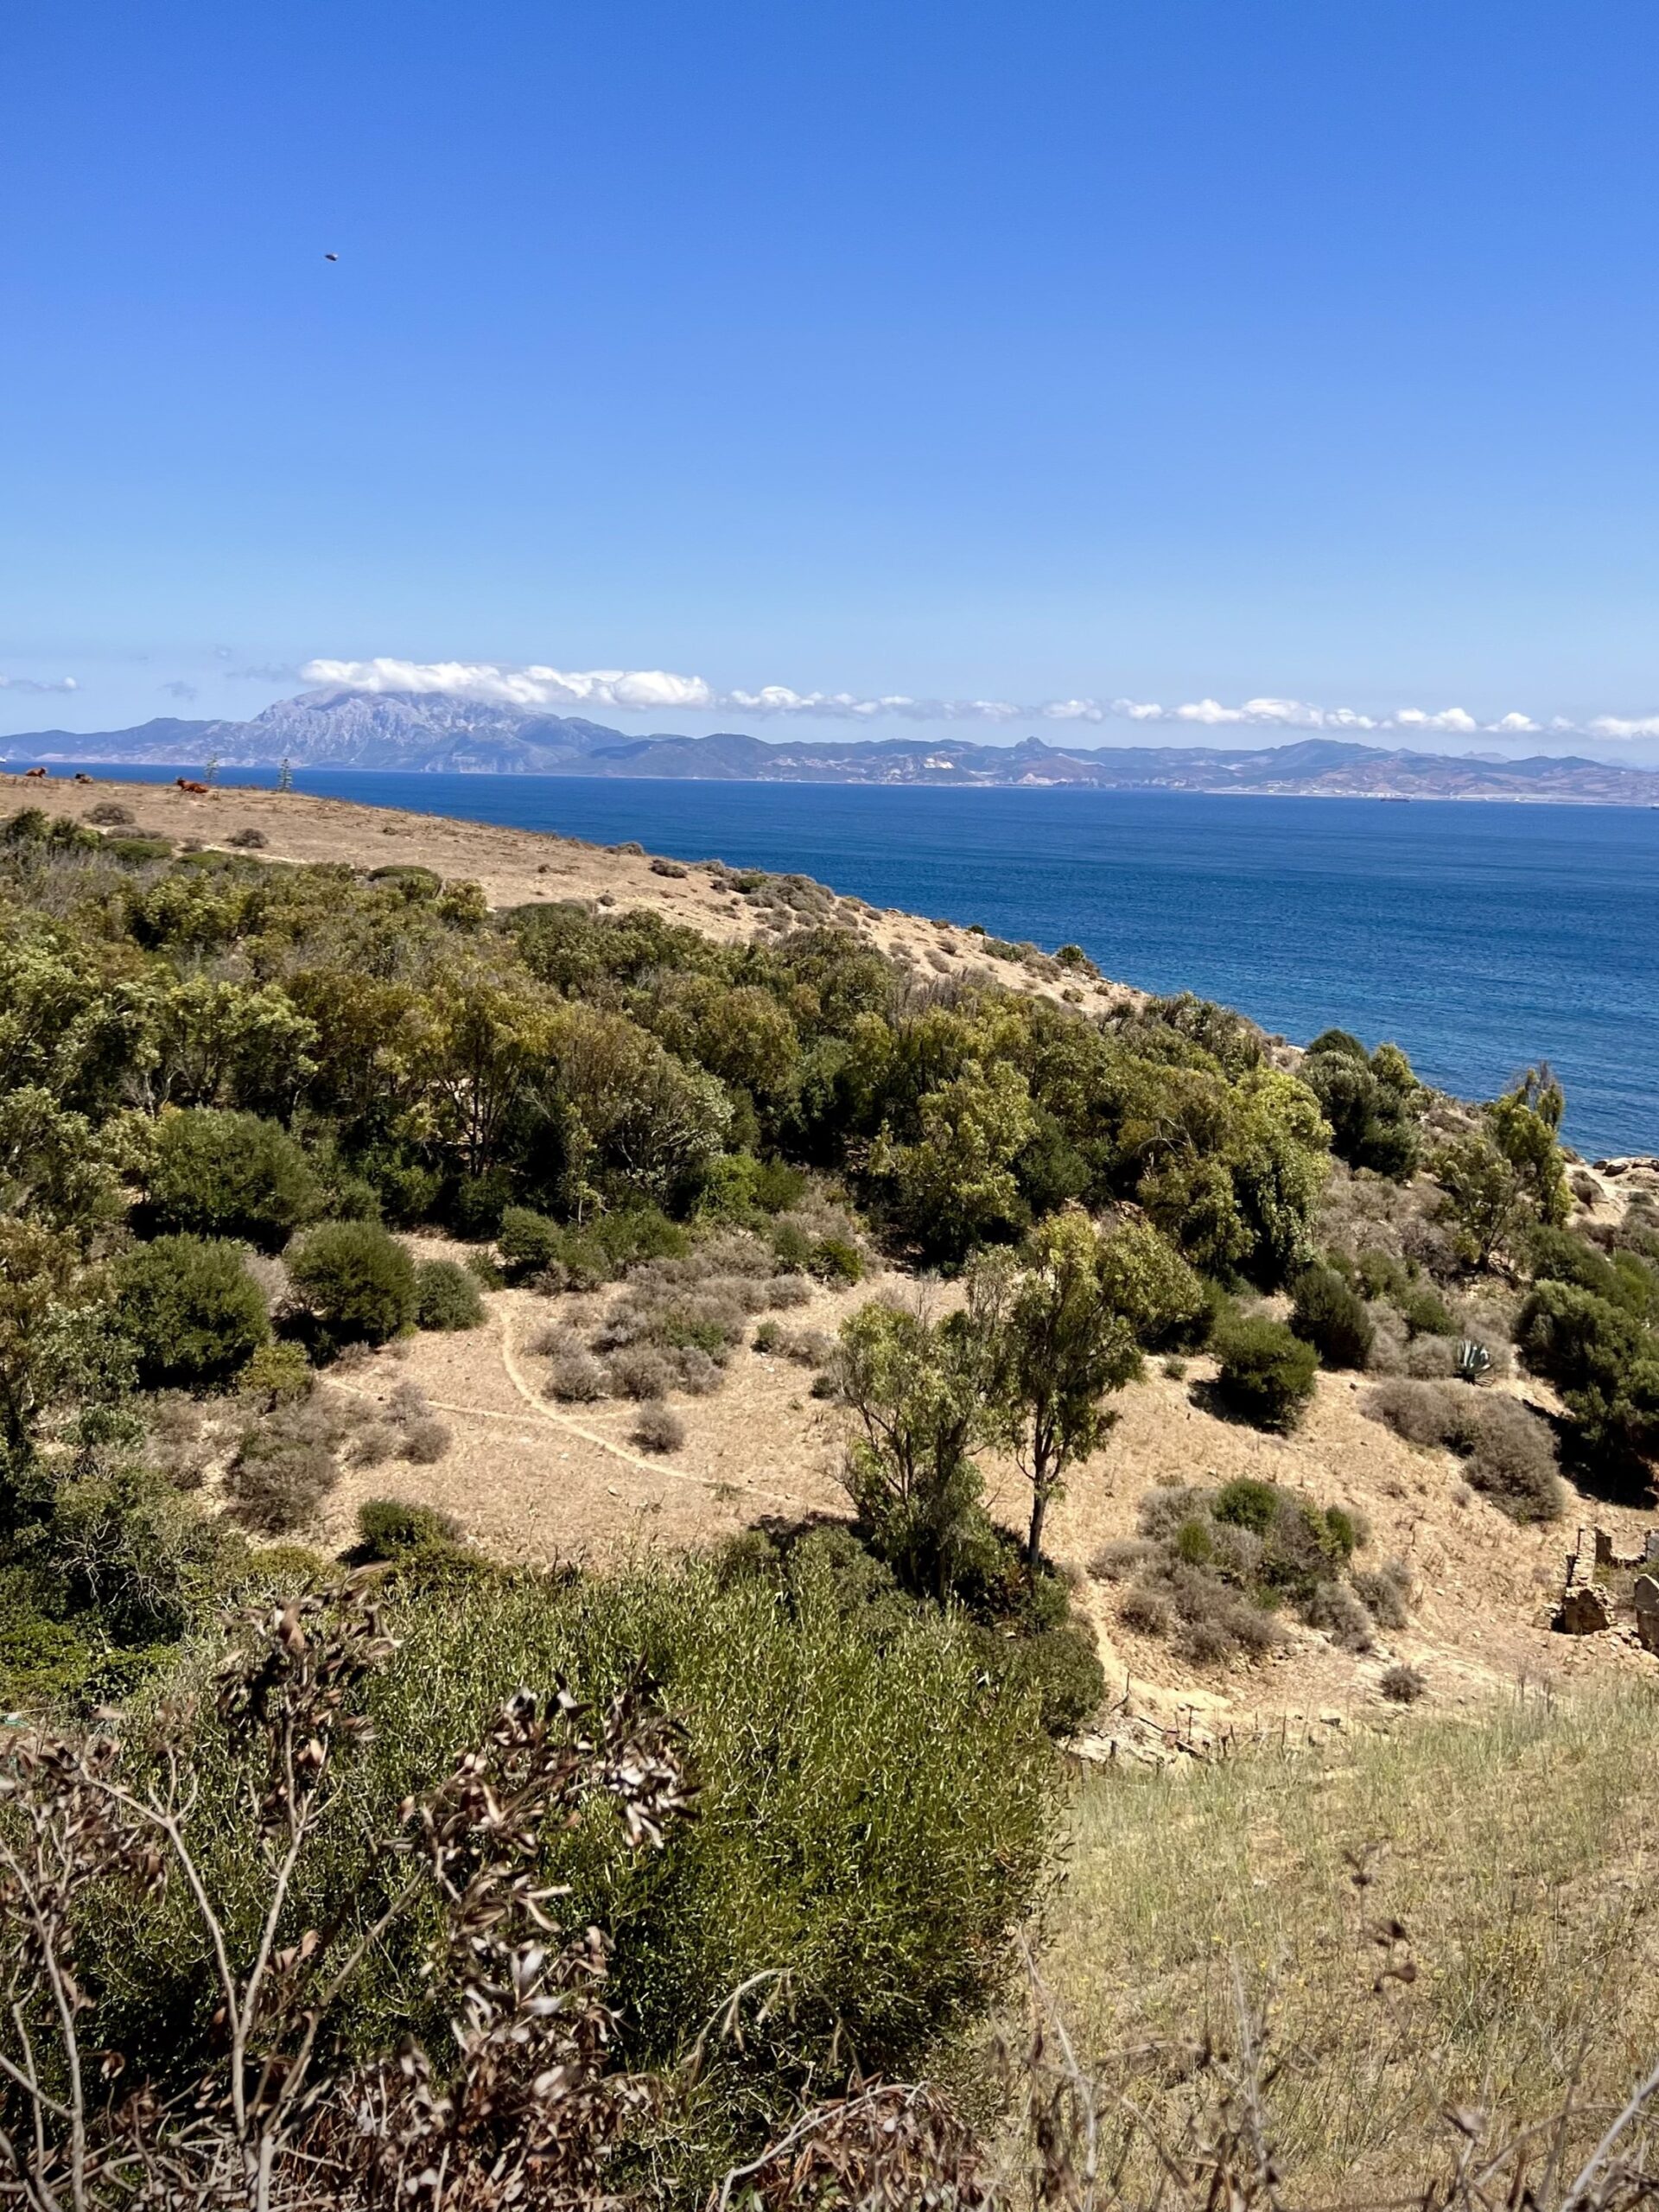 a view across the Strait of Gibraltar. In the foreground is dry dusty scrub habitat. in the center is the blue water of the strait. And behind in the distance is the other shore with some clouds and mountain ridges